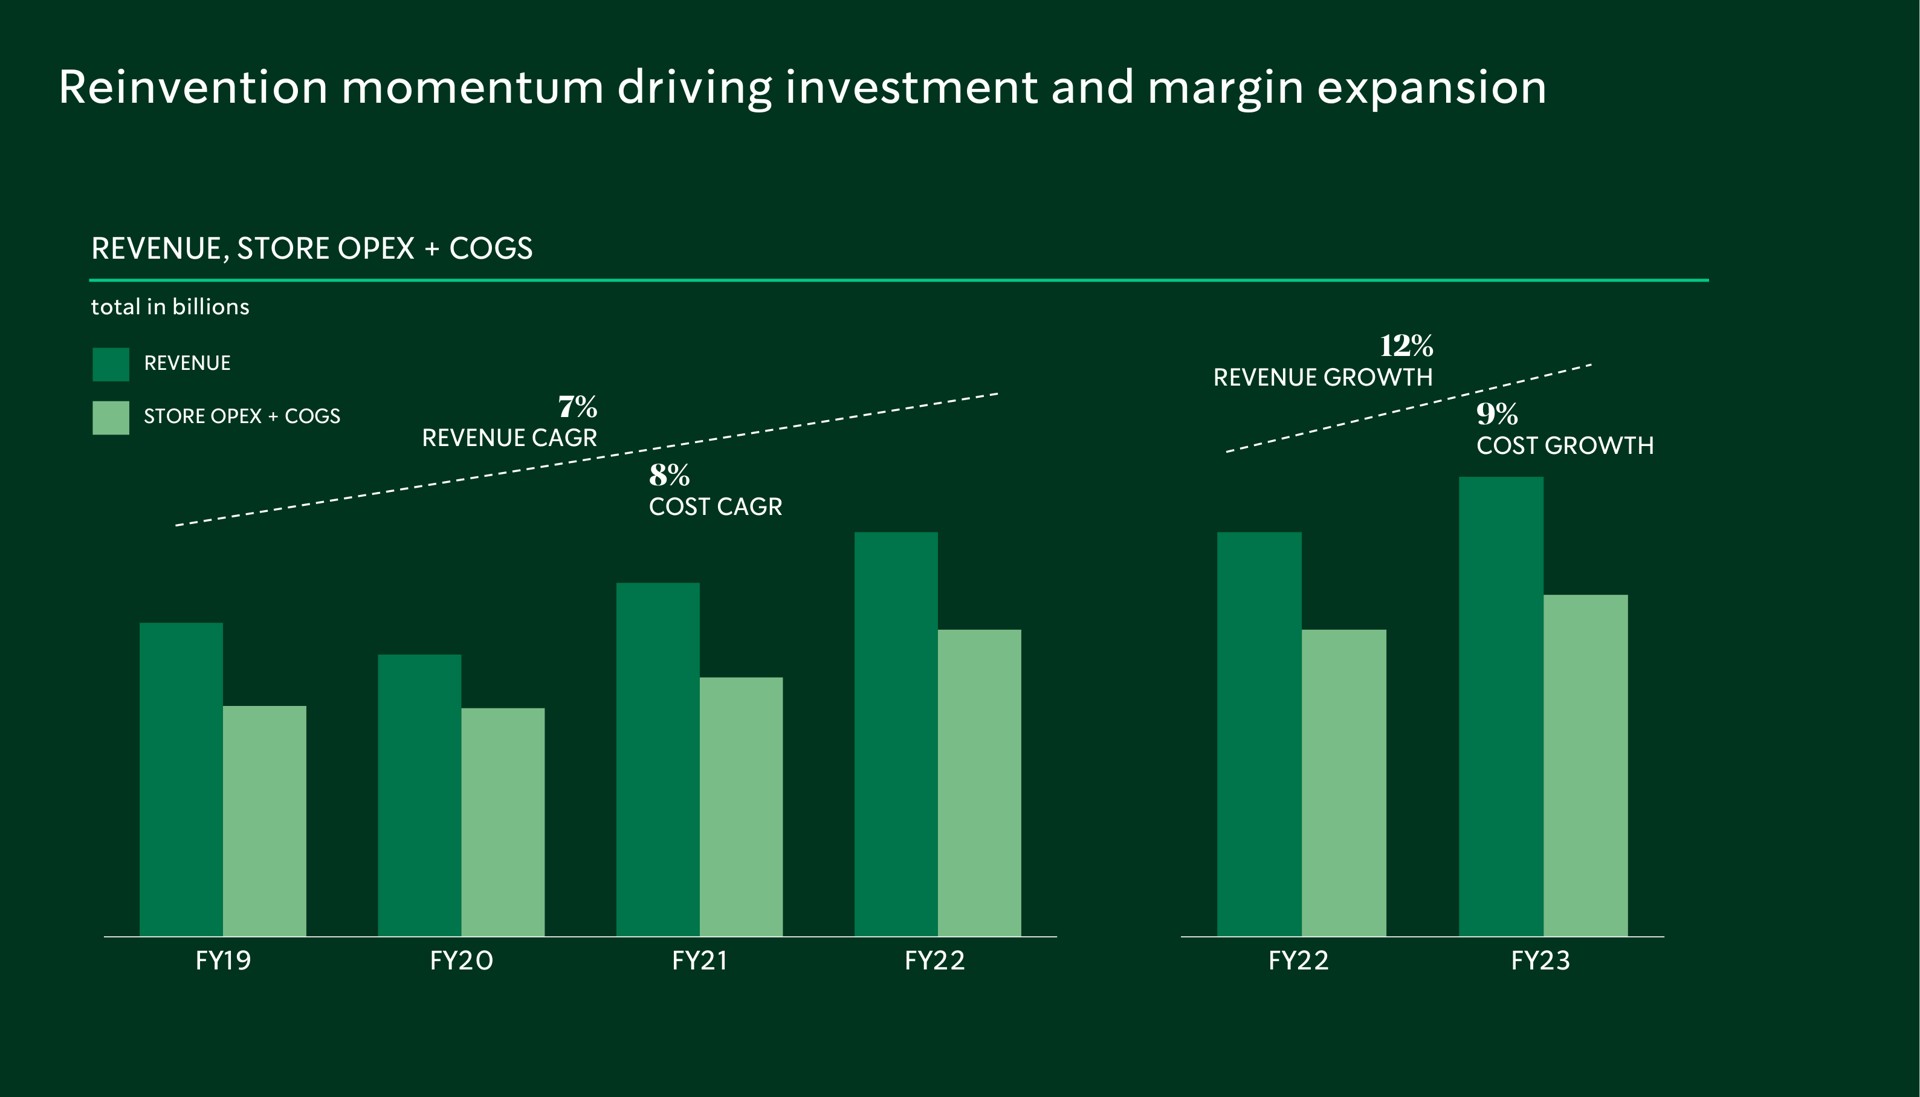 reinvention momentum driving investment and margin expansion | Starbucks